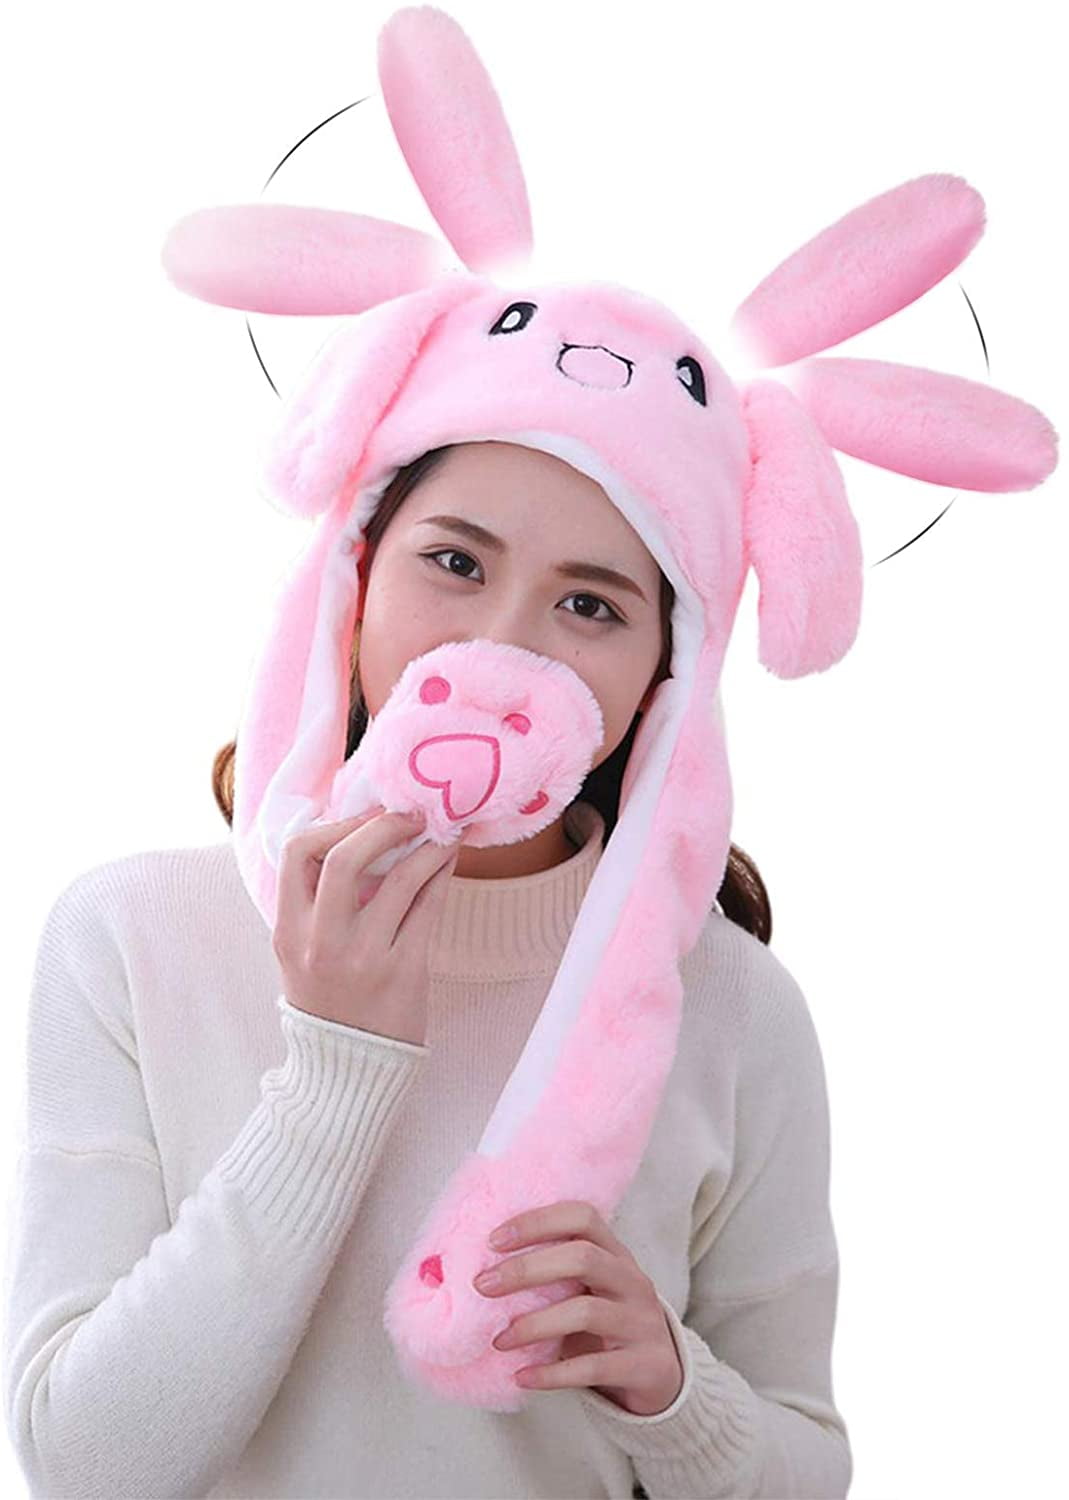 Pack of 2 Bunny Ear Moving Jumping Hat & Headband White/Pink Plush Bunny Funny Hat Rabbit Headband Hair Band Ear Pop-Up Hat for Girls Women Role Play Party Costume Accessories 